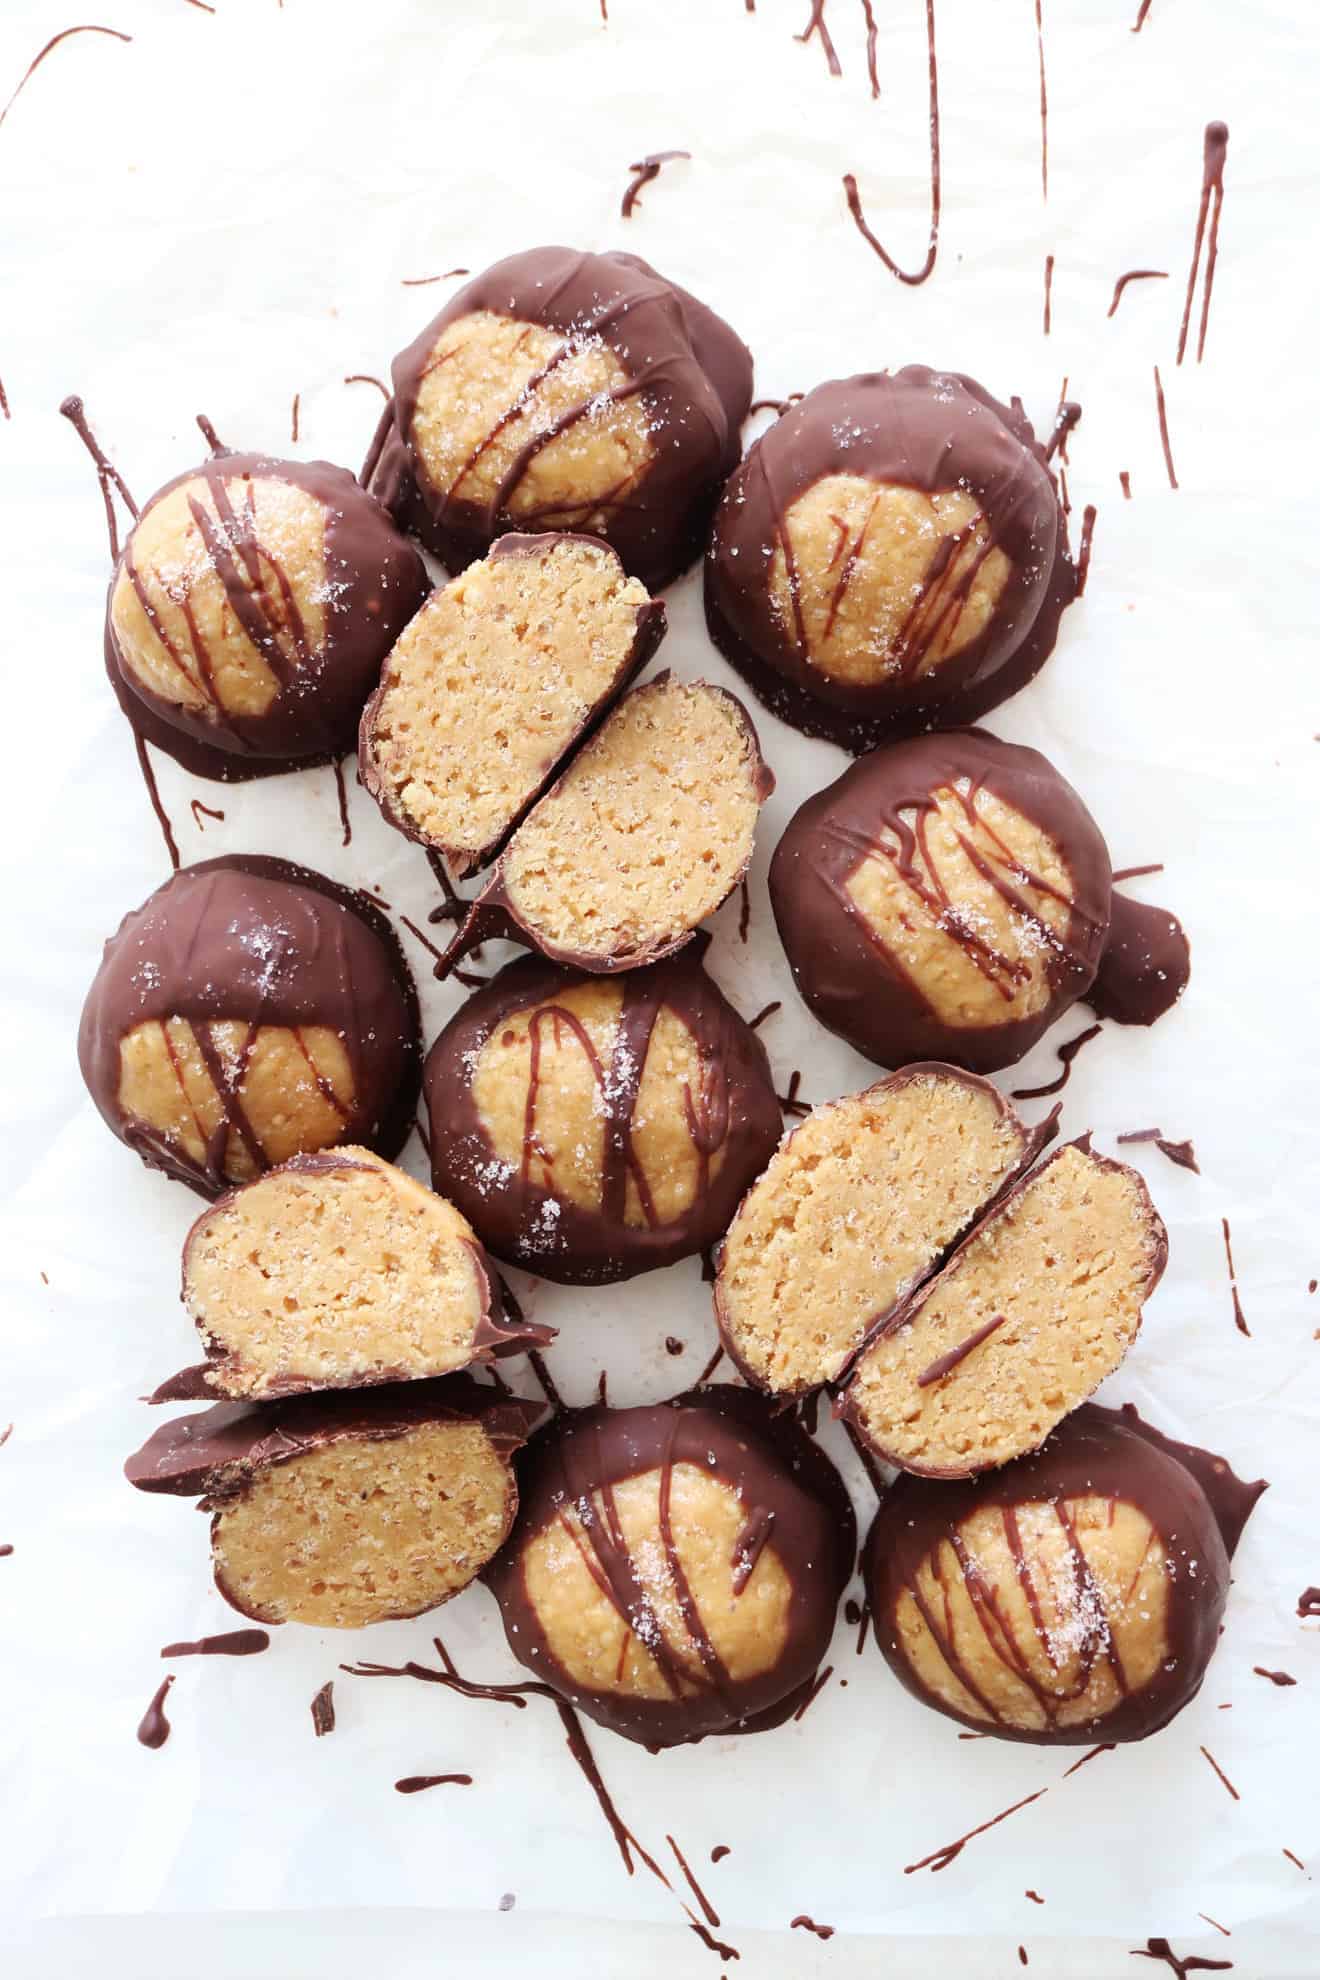 This is an overhead image of chocolate covered peanut butter balls. Some balls are sliced in half revealing a crunchy texture. The balls sit on a white background. 